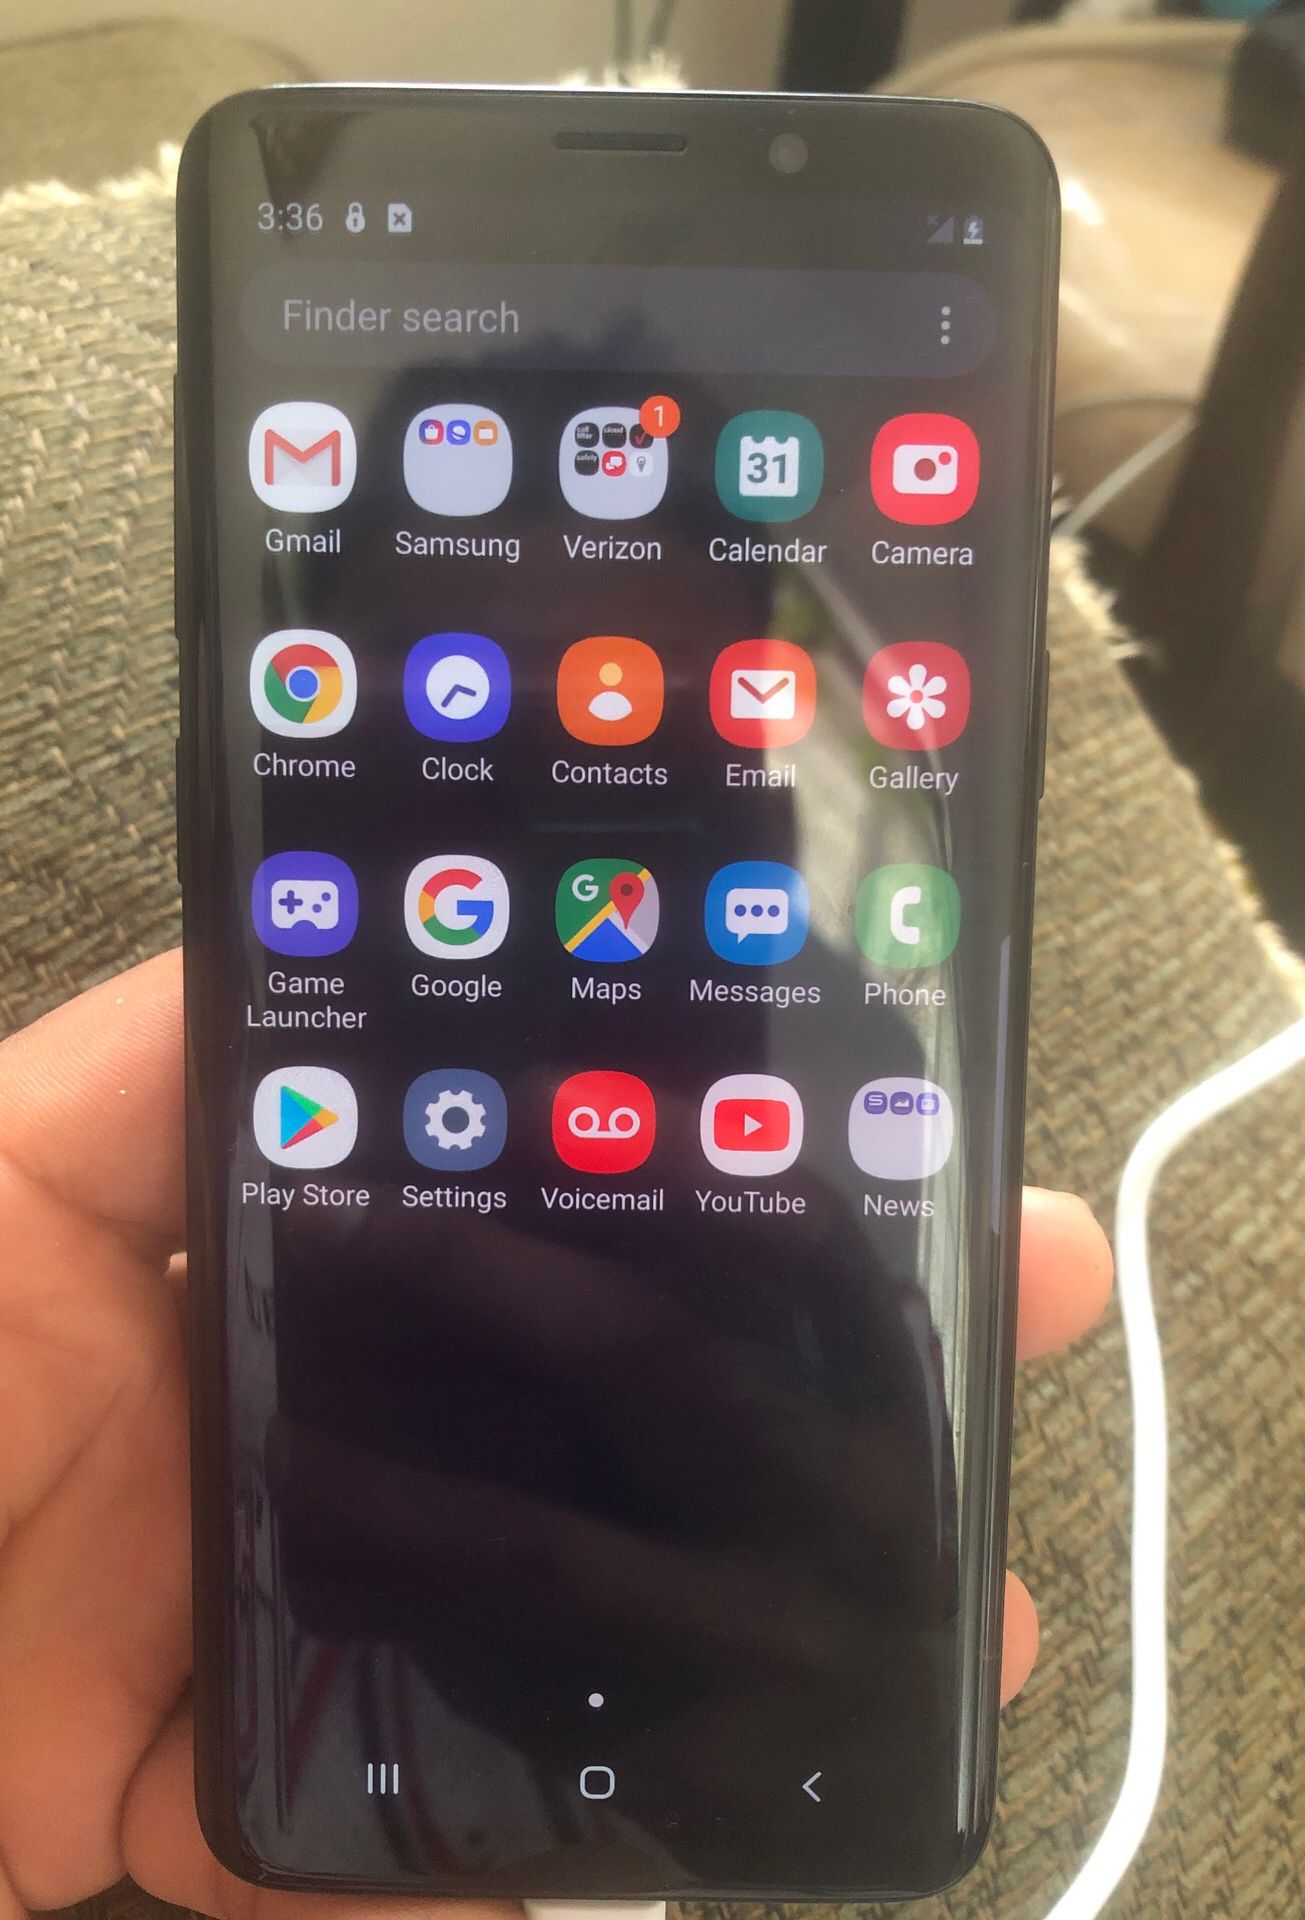 Samsung galaxy s9 unloked eny carrier phone is in perfect conditions no scratches on the screen works perfectly fine